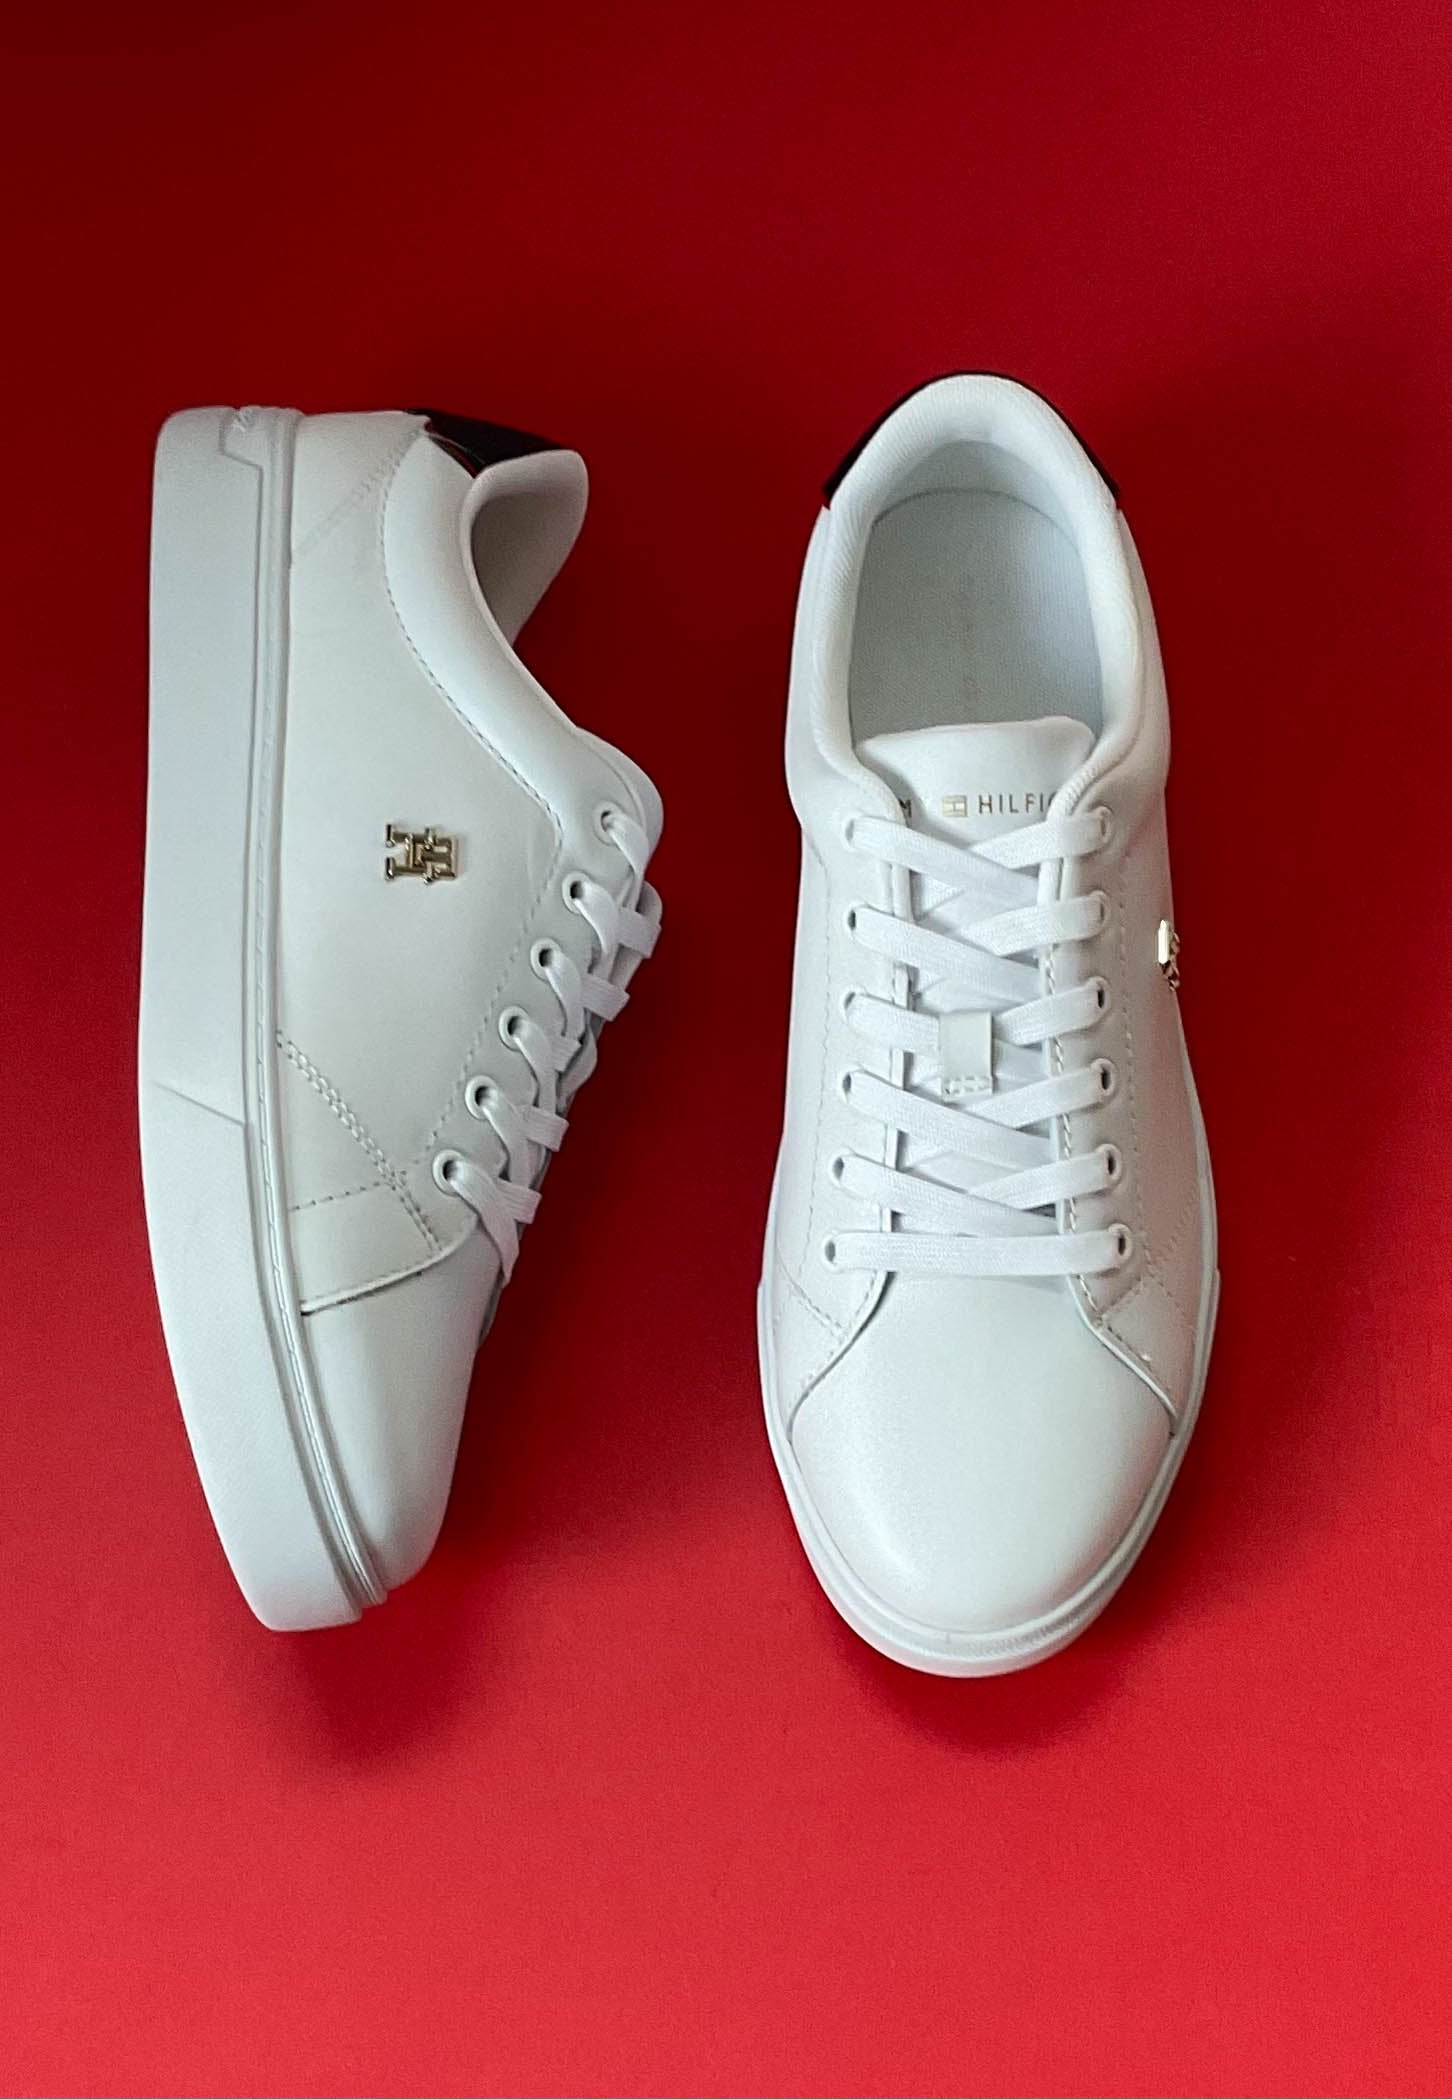 tommy hilfiger ladies white leather shoes